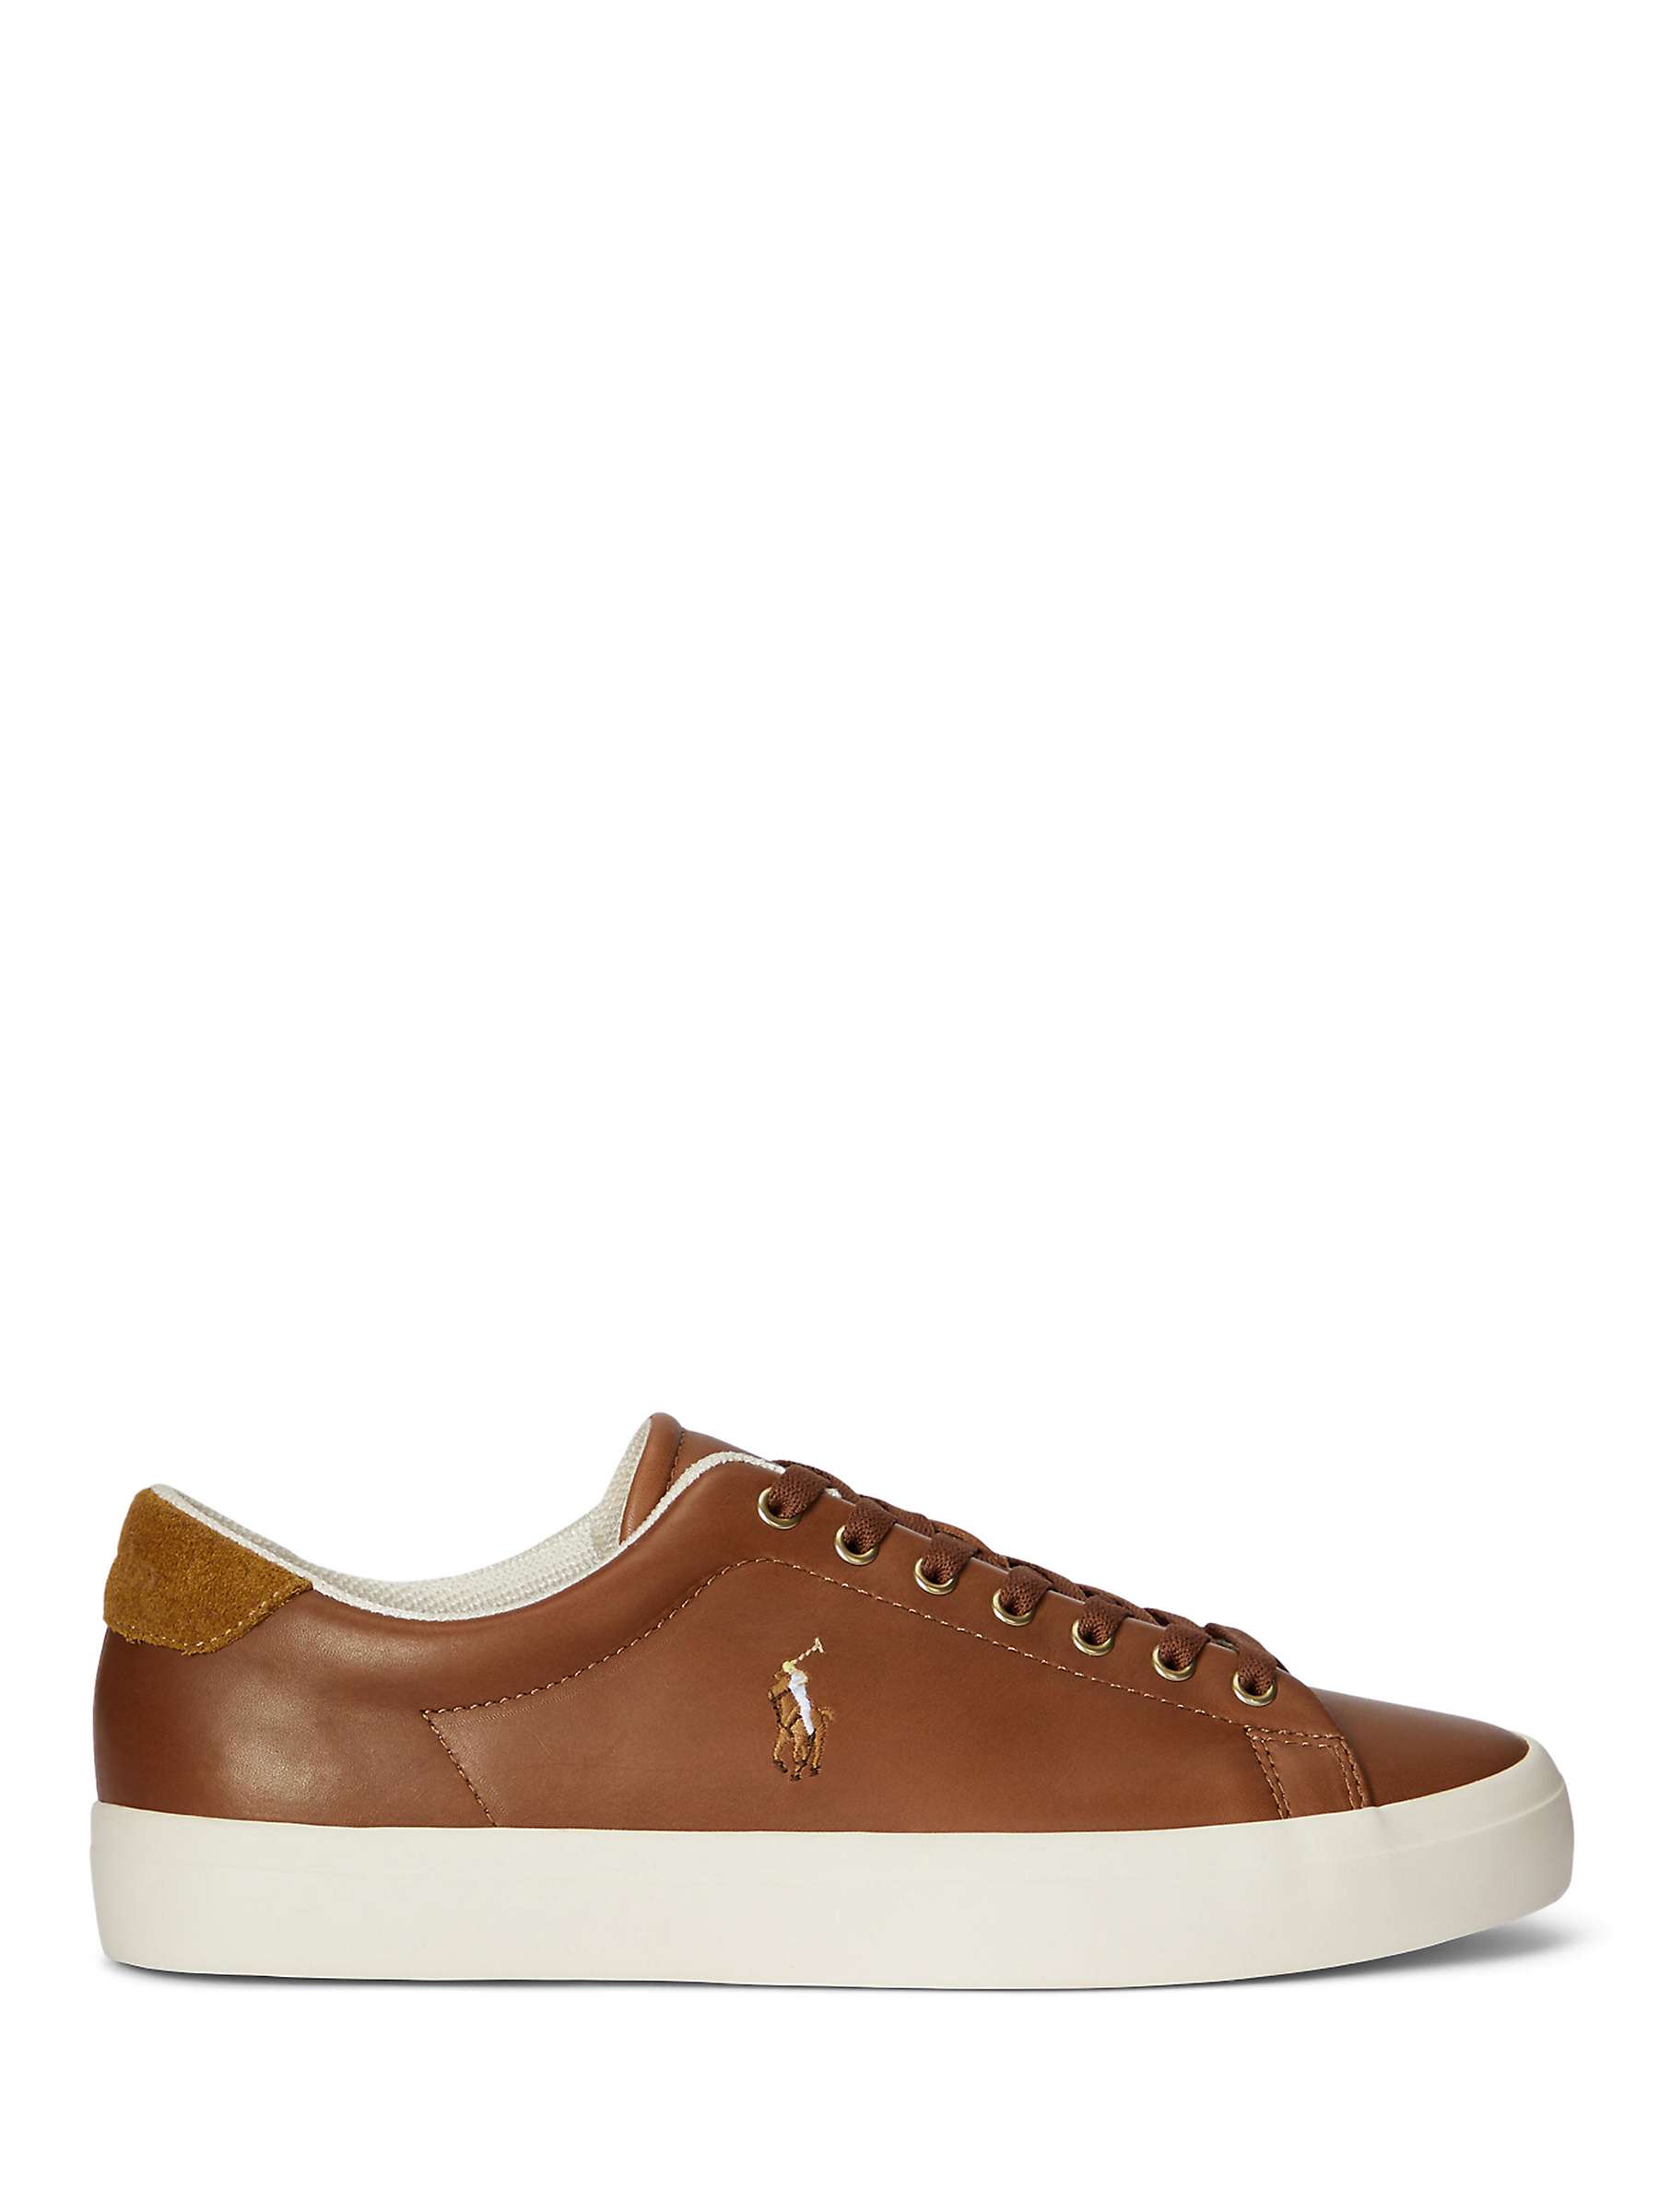 Buy Polo Ralph Lauren Longwood Leather Trainers, Tan Online at johnlewis.com